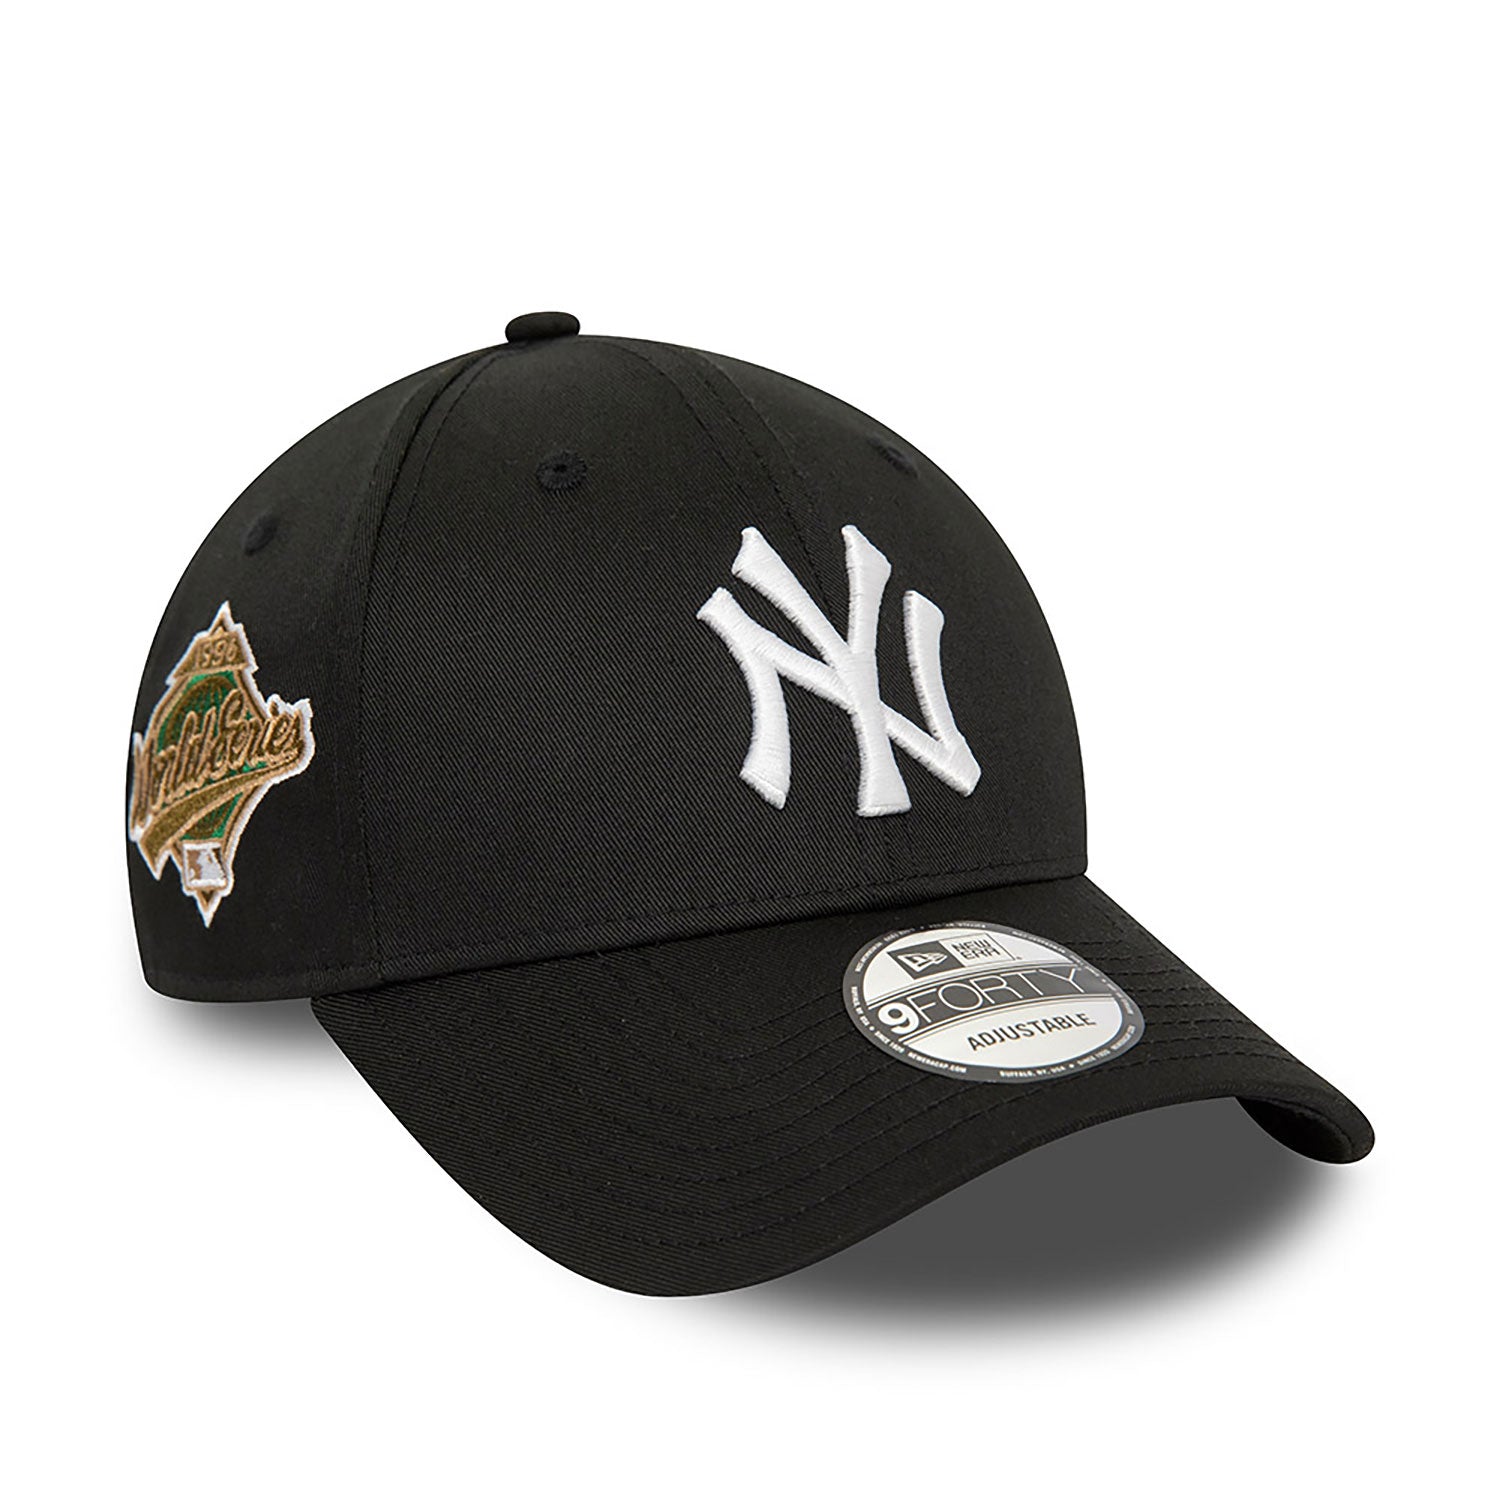 NEW ERA 9FORTY NEW YORK YANKEES TEAM SIDE PATCH BLACK / KELLY 